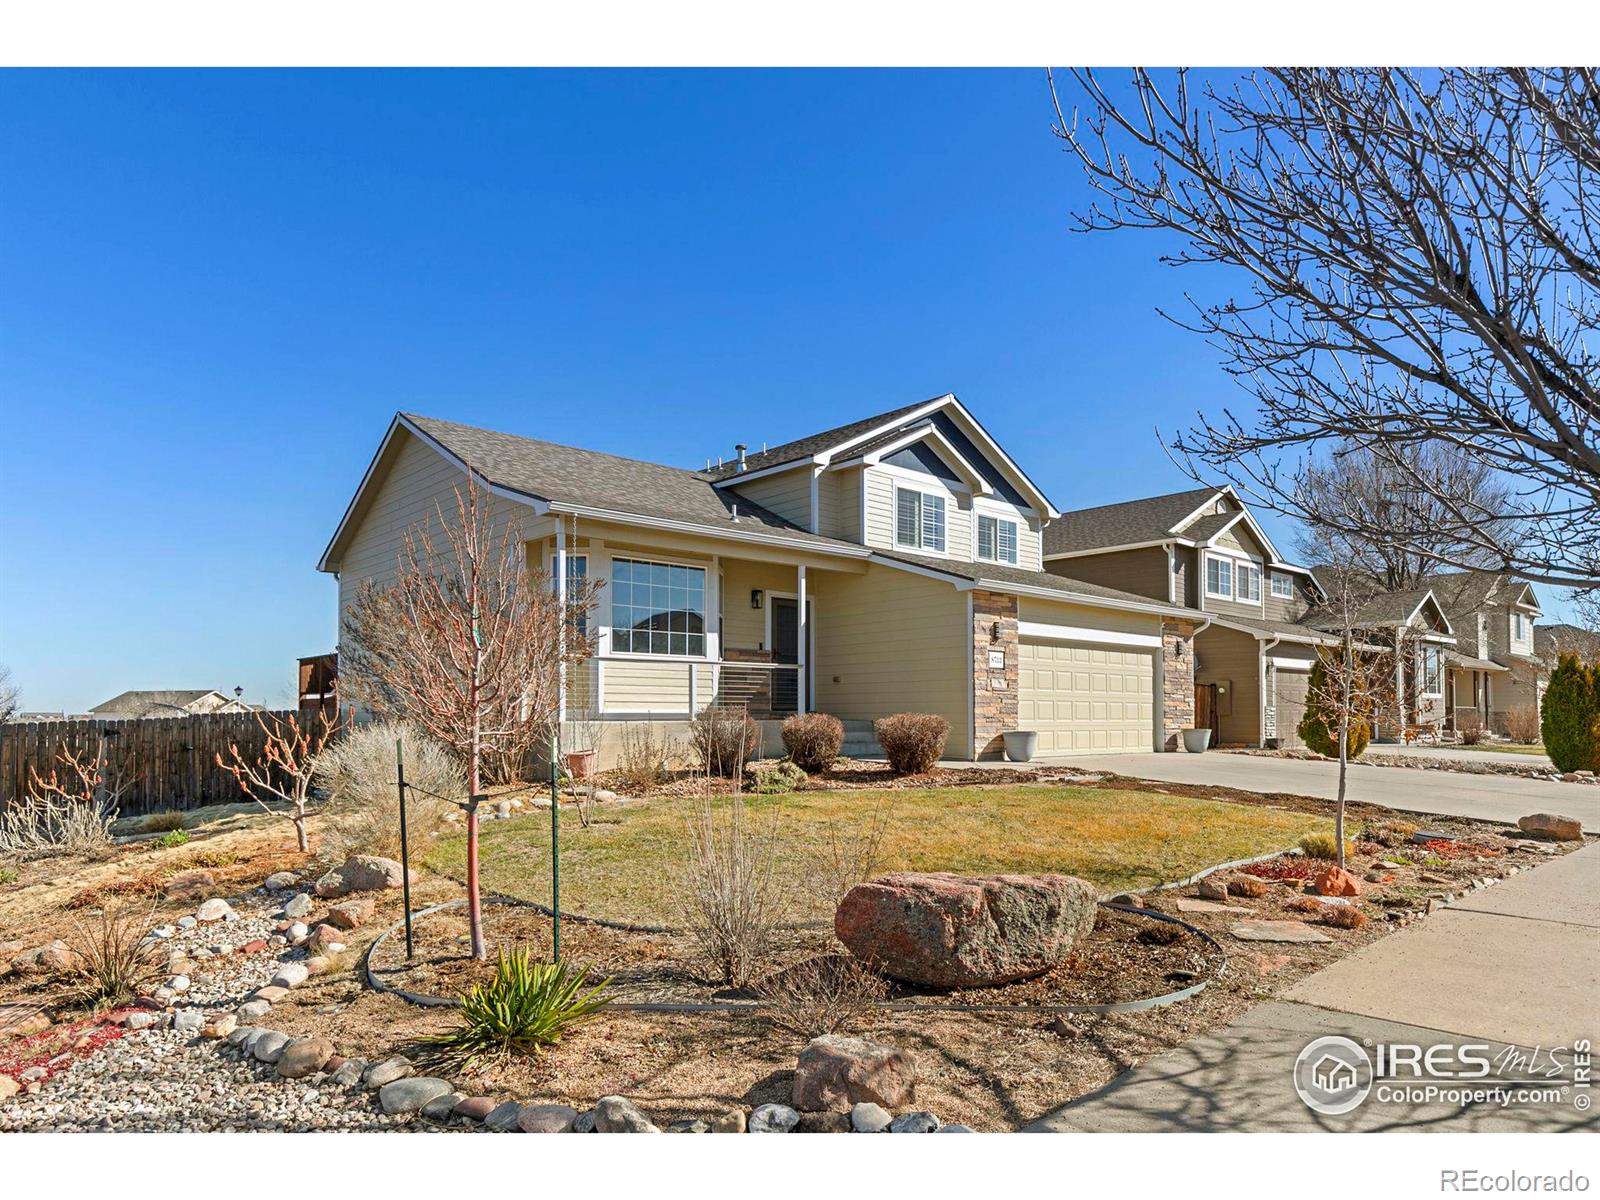 Report Image for 8733  19th St Rd,Greeley, Colorado